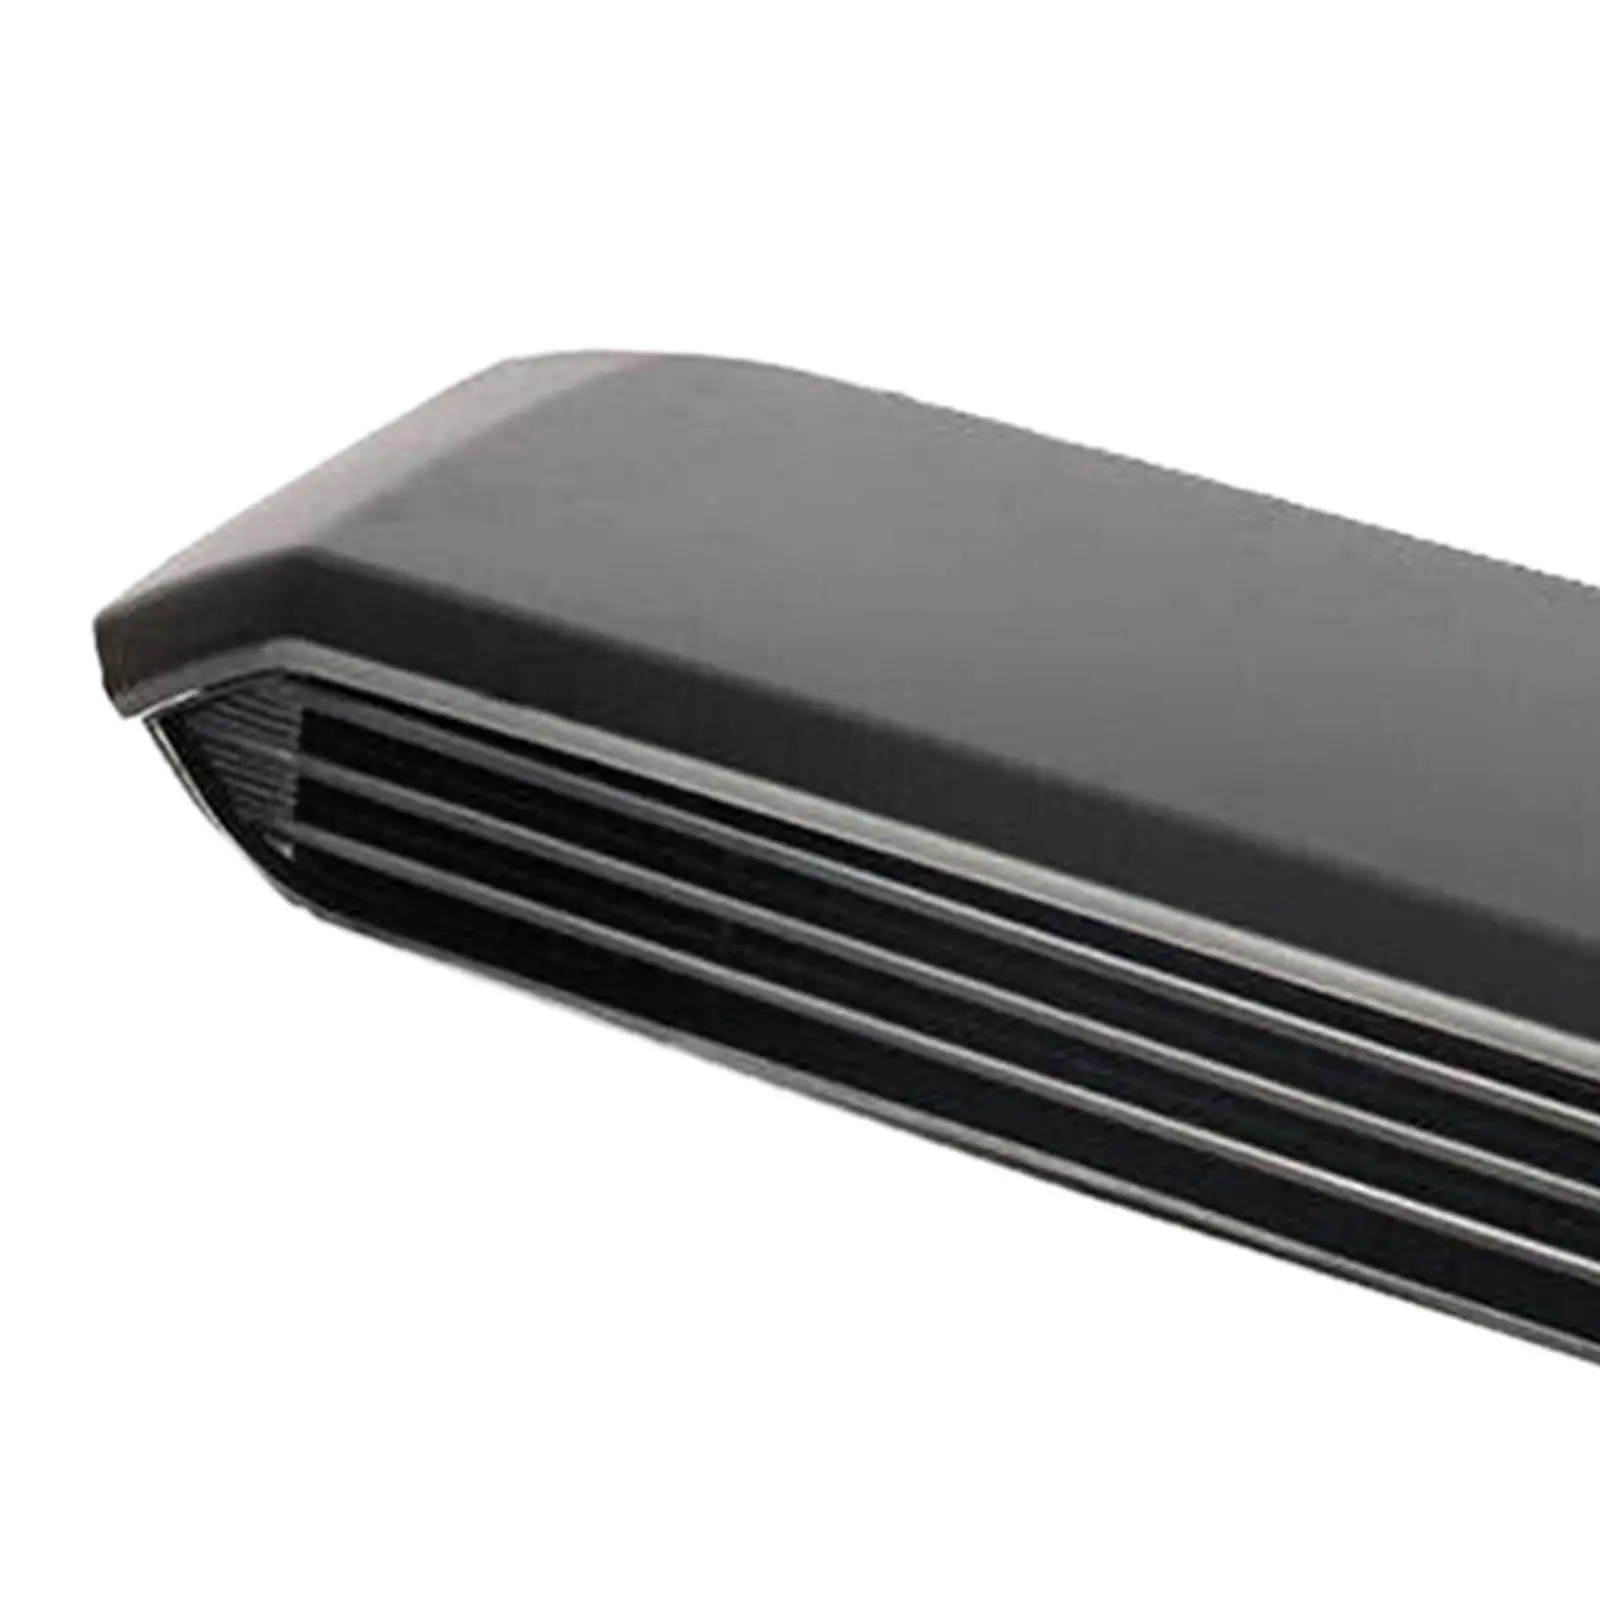 76181-04900 Easy to Install High Performance Premium Hood Scoop Kit Replaces Car